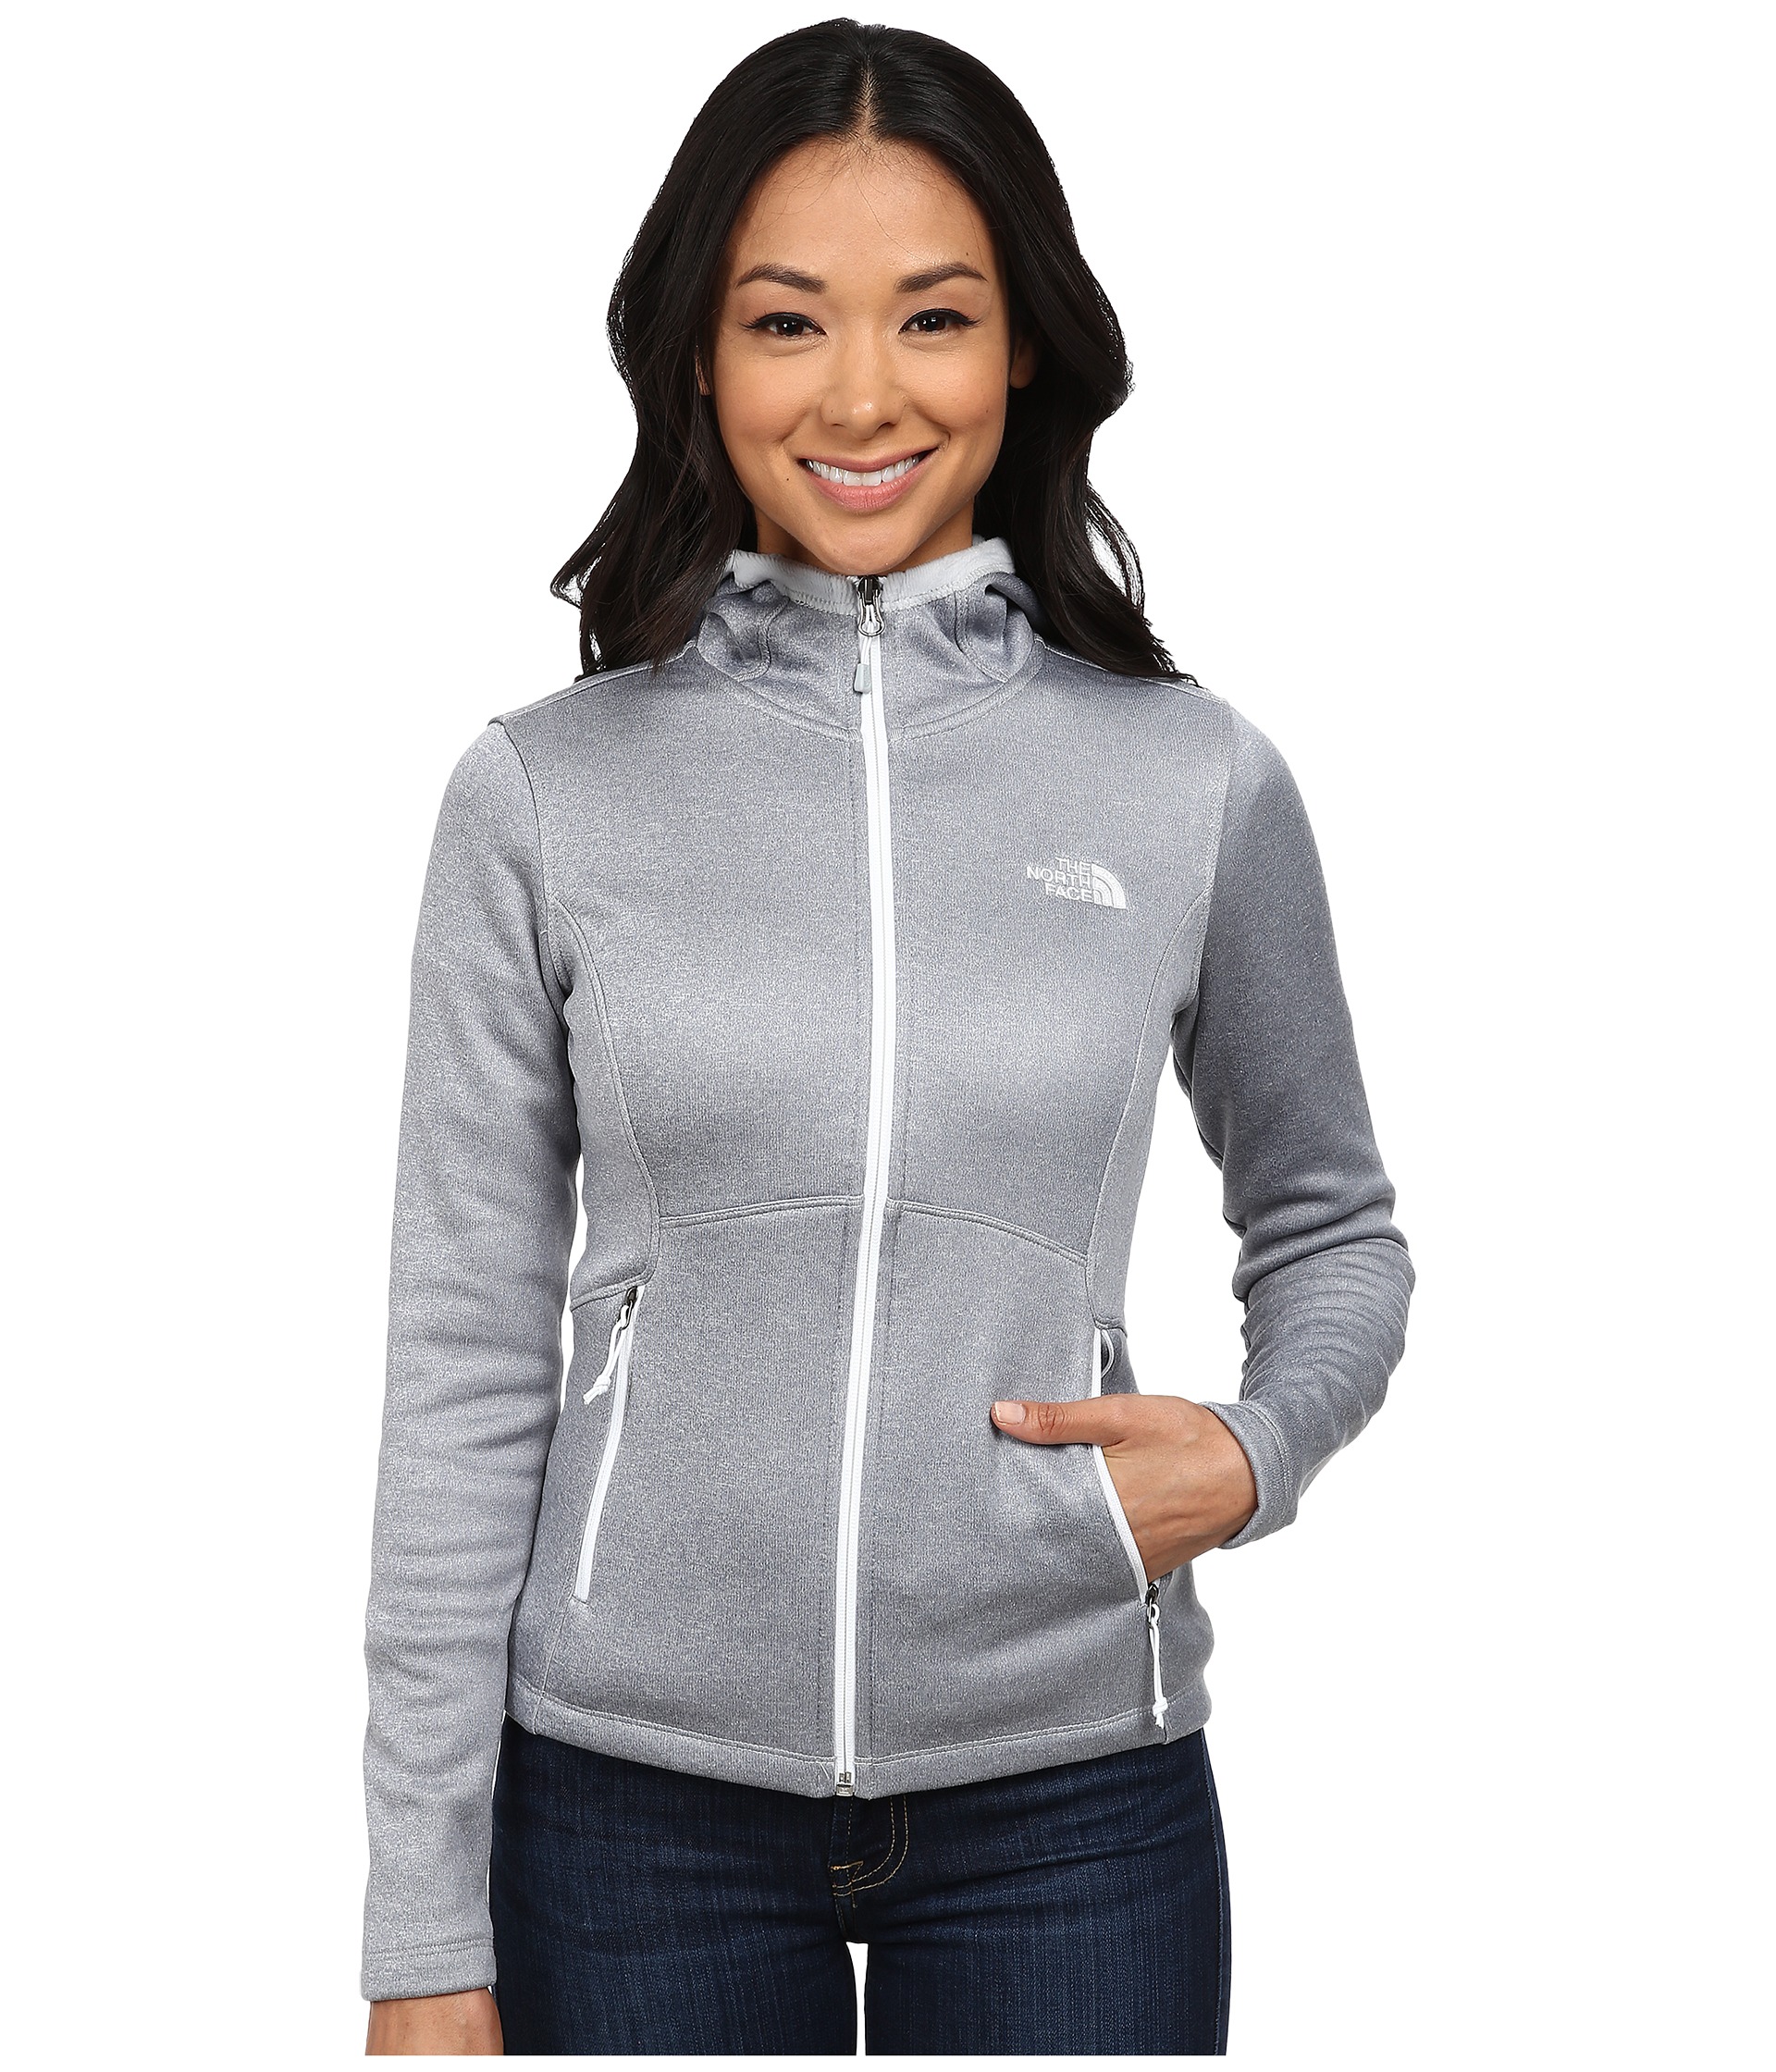 The North Face Agave Hoodie - Zappos.com Free Shipping BOTH Ways